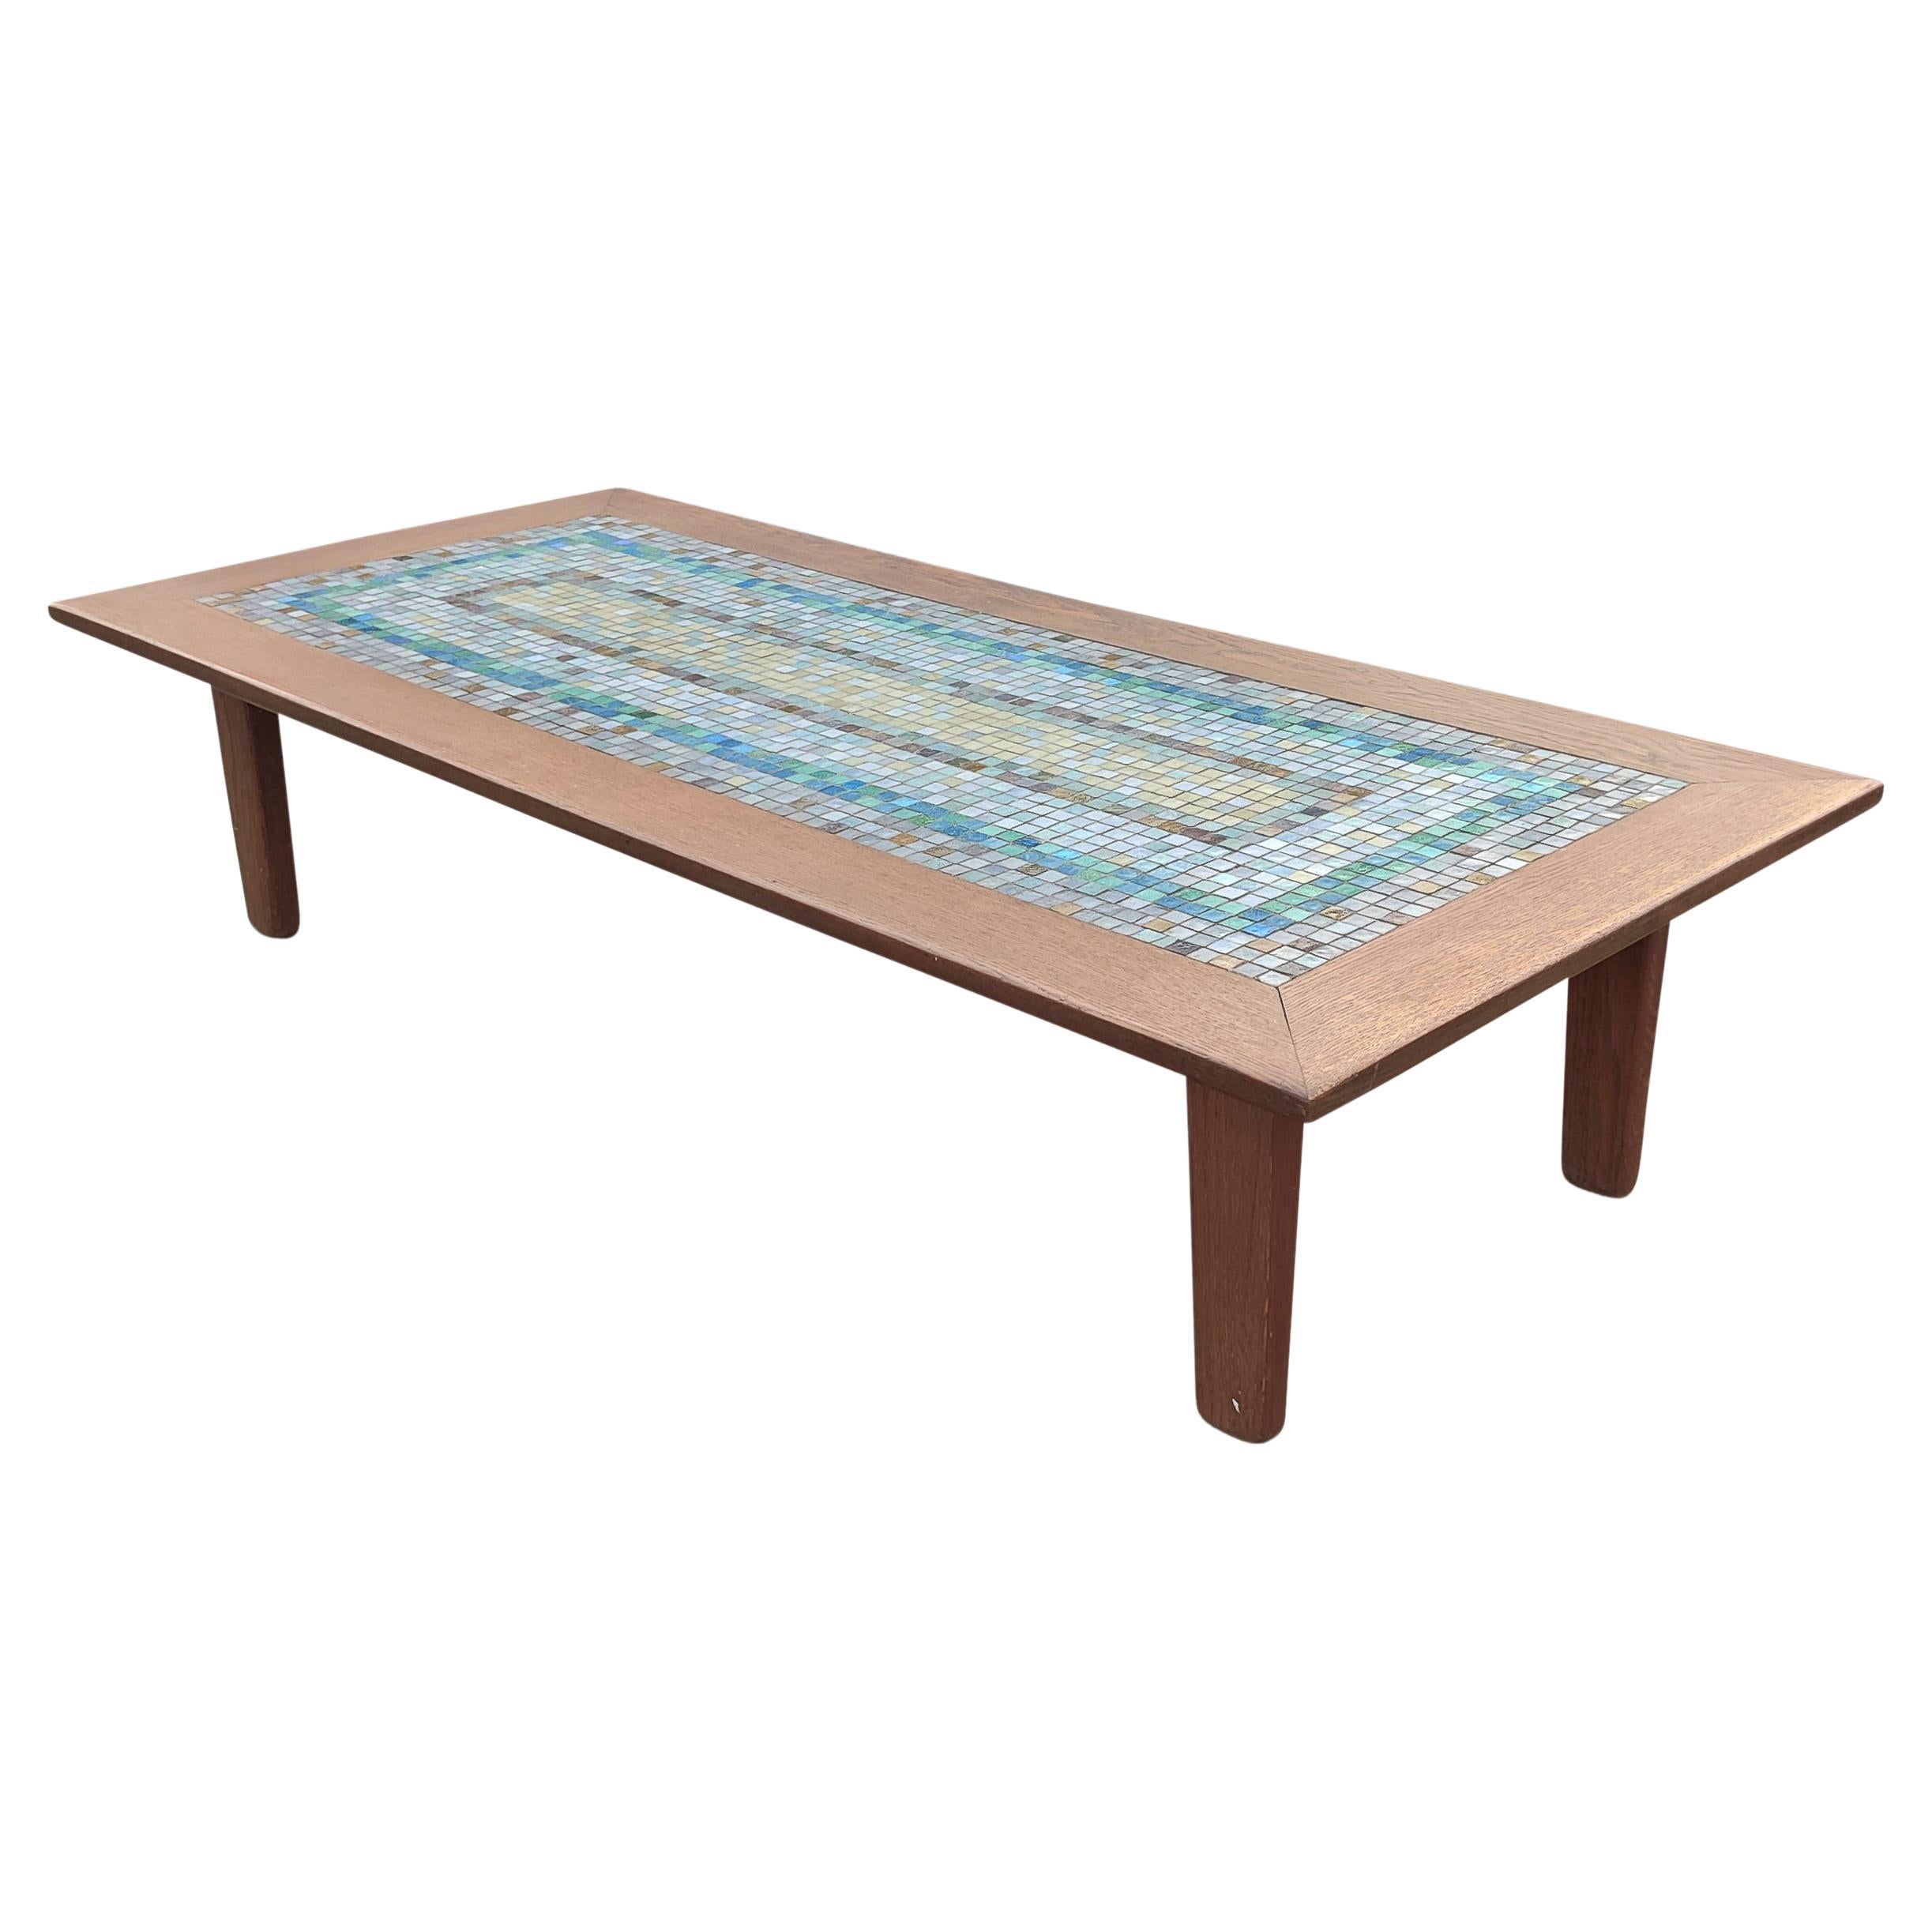 This coffee table was designed and hand-built by Kurt G Kurtis, a listed painter and craftsman, and is very large, and super good looking! At over 70 inches long, its heft not only lies in its size but also its materials. It's made of solid oak